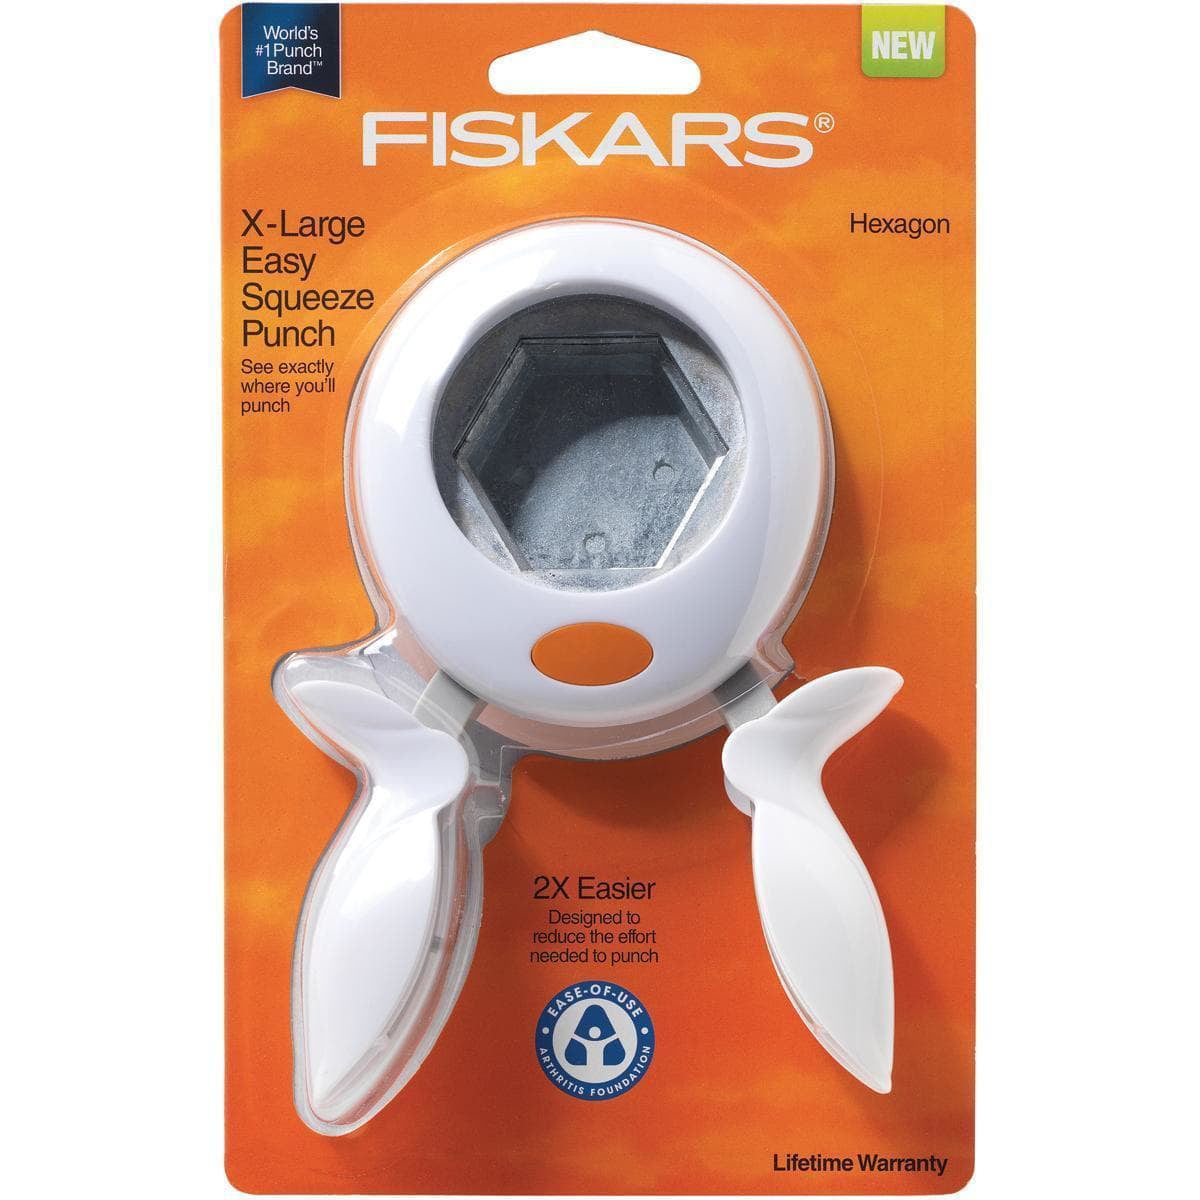 X-Large XL Fiskars 1004741 Squeeze Punch White